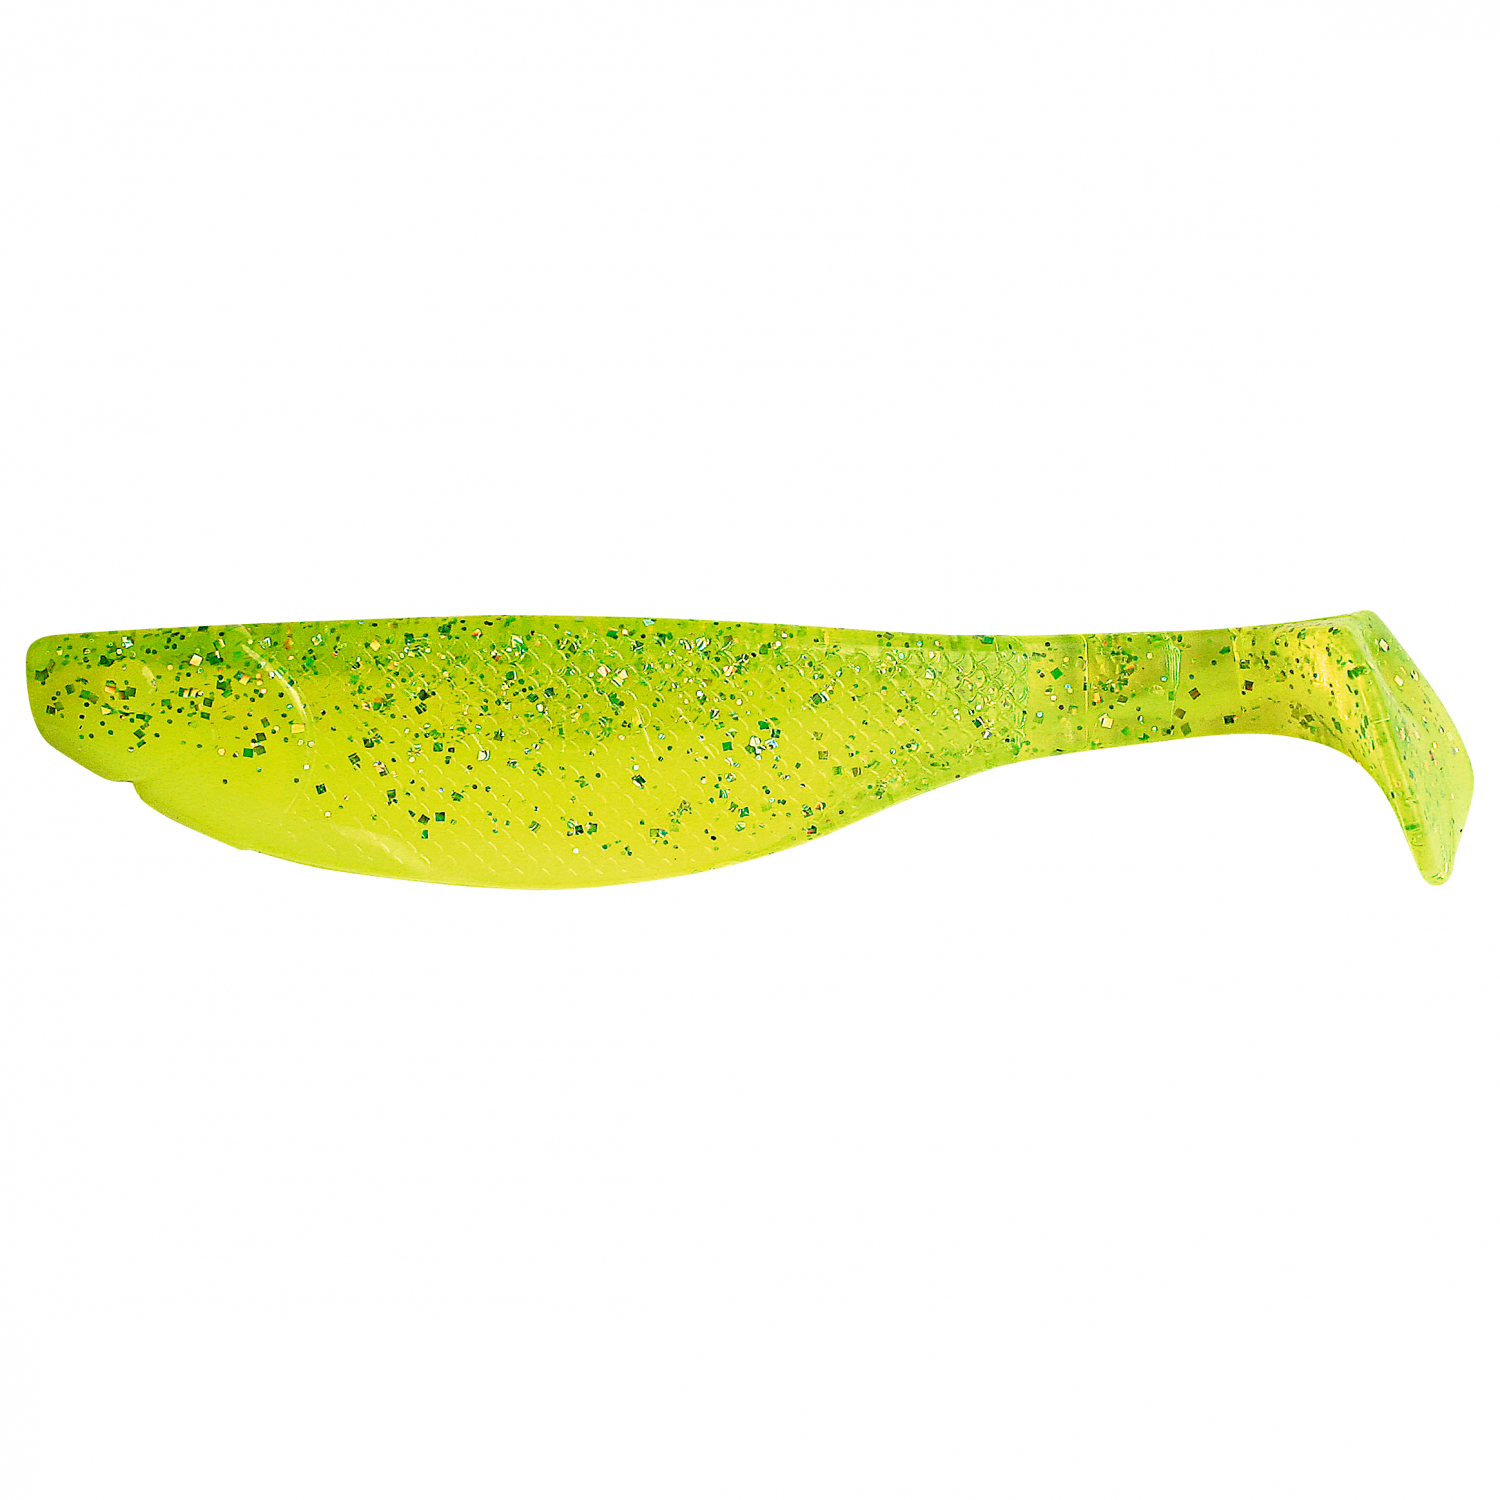 ShadXperts Shad Kopyto River (fluo yellow/fluo green/glitter) 